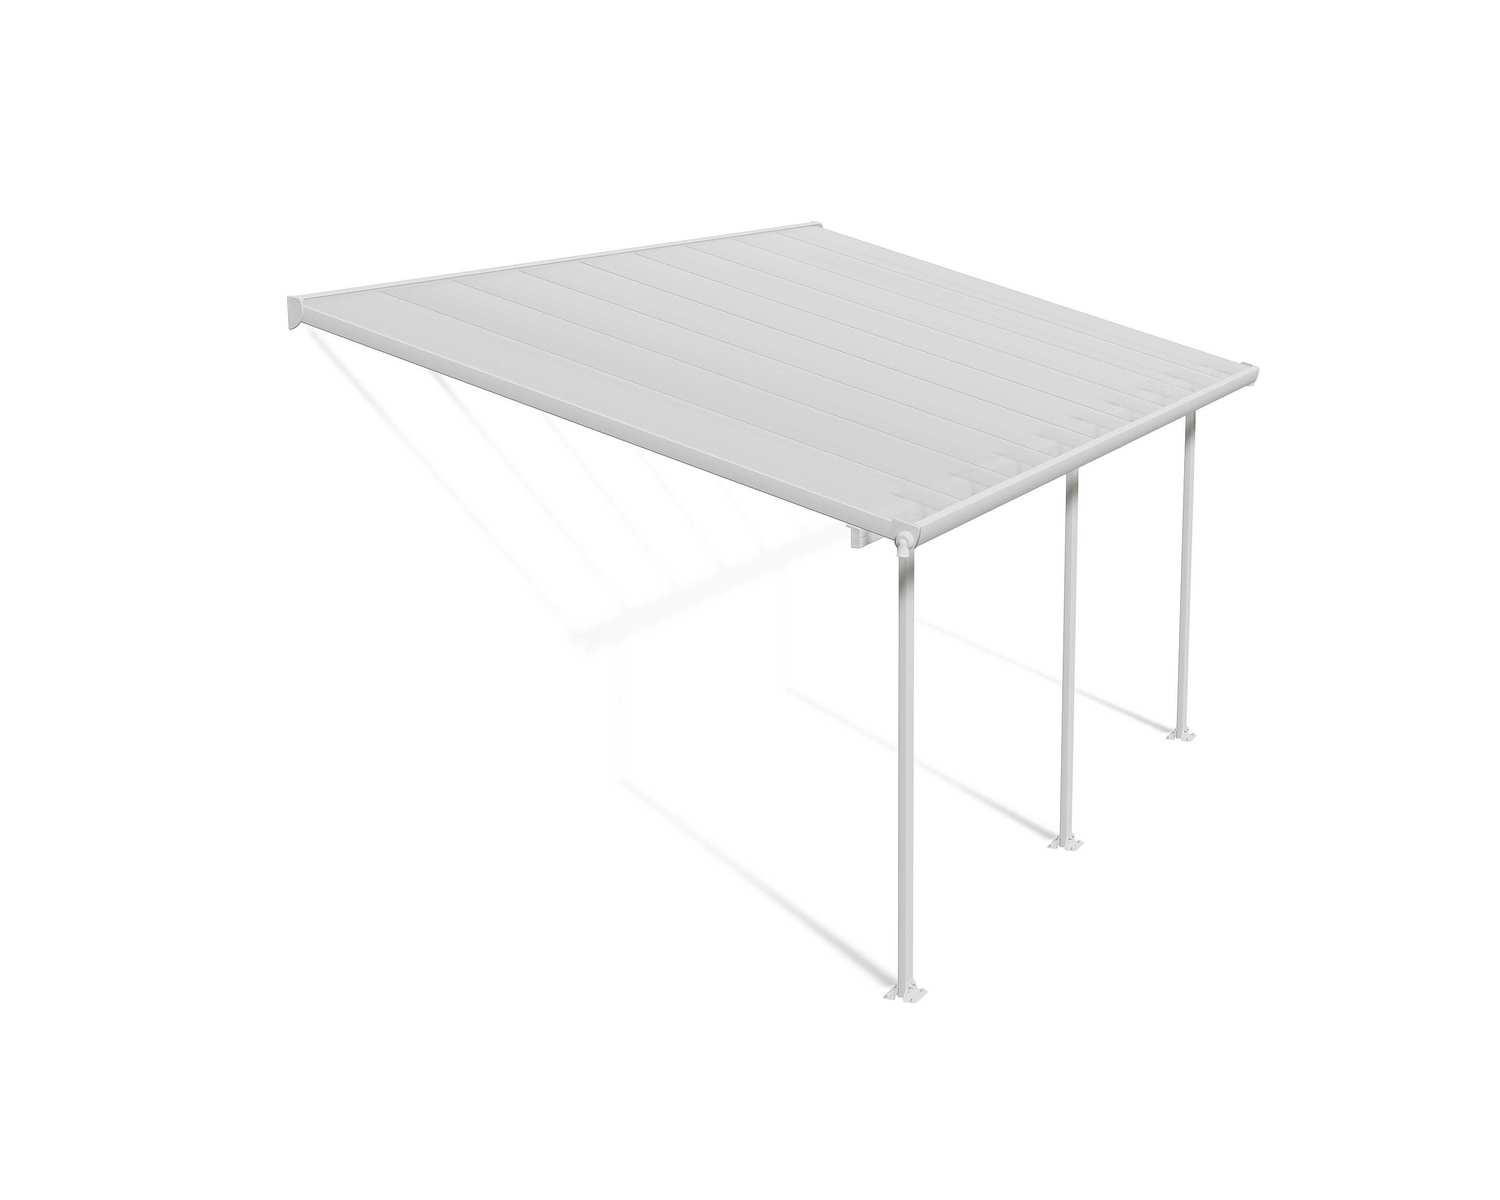 Feria 10 ft. x 18 ft. White Aluminium Patio Cover With 3 Posts, Clear Twin-Wall Polycarbonate Roof Panels.